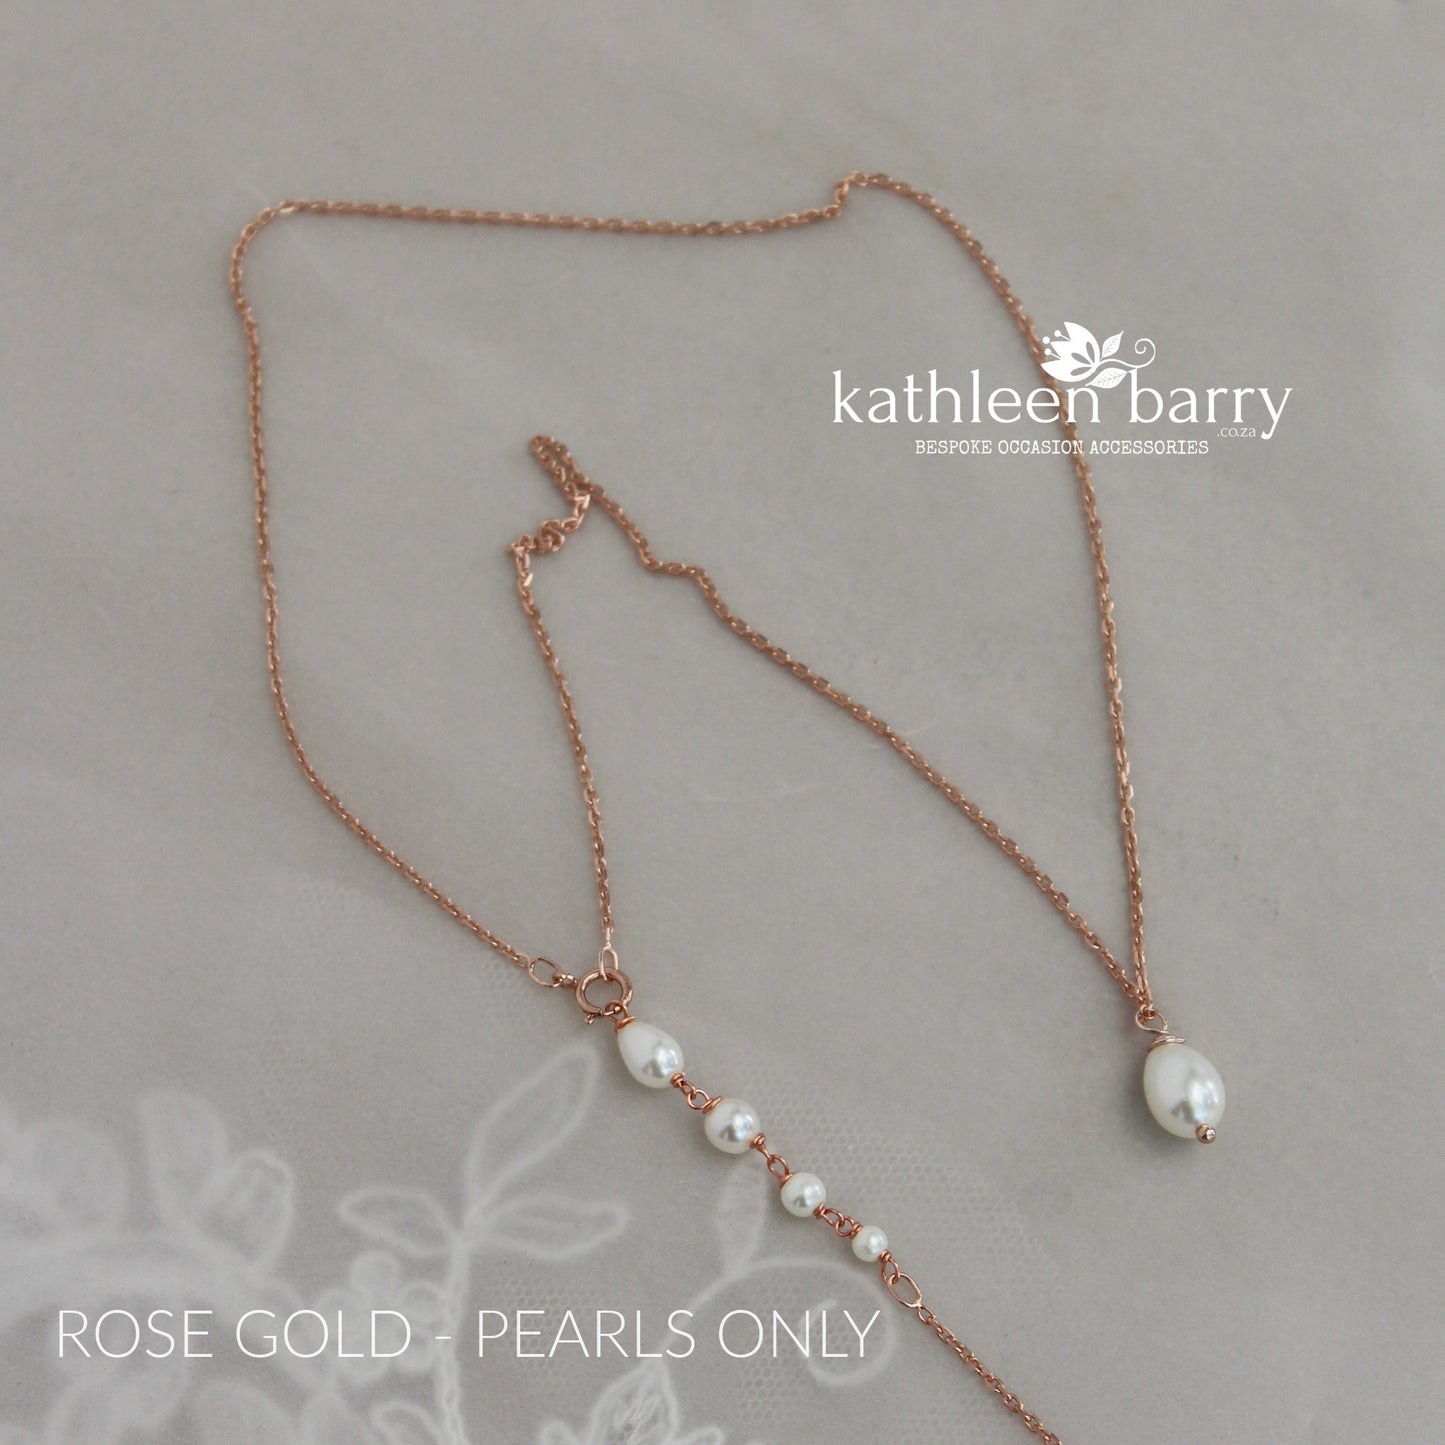 Kirsten Back drop silver, cubic Zirconia and OR pearl necklace. Rose gold & gold also available